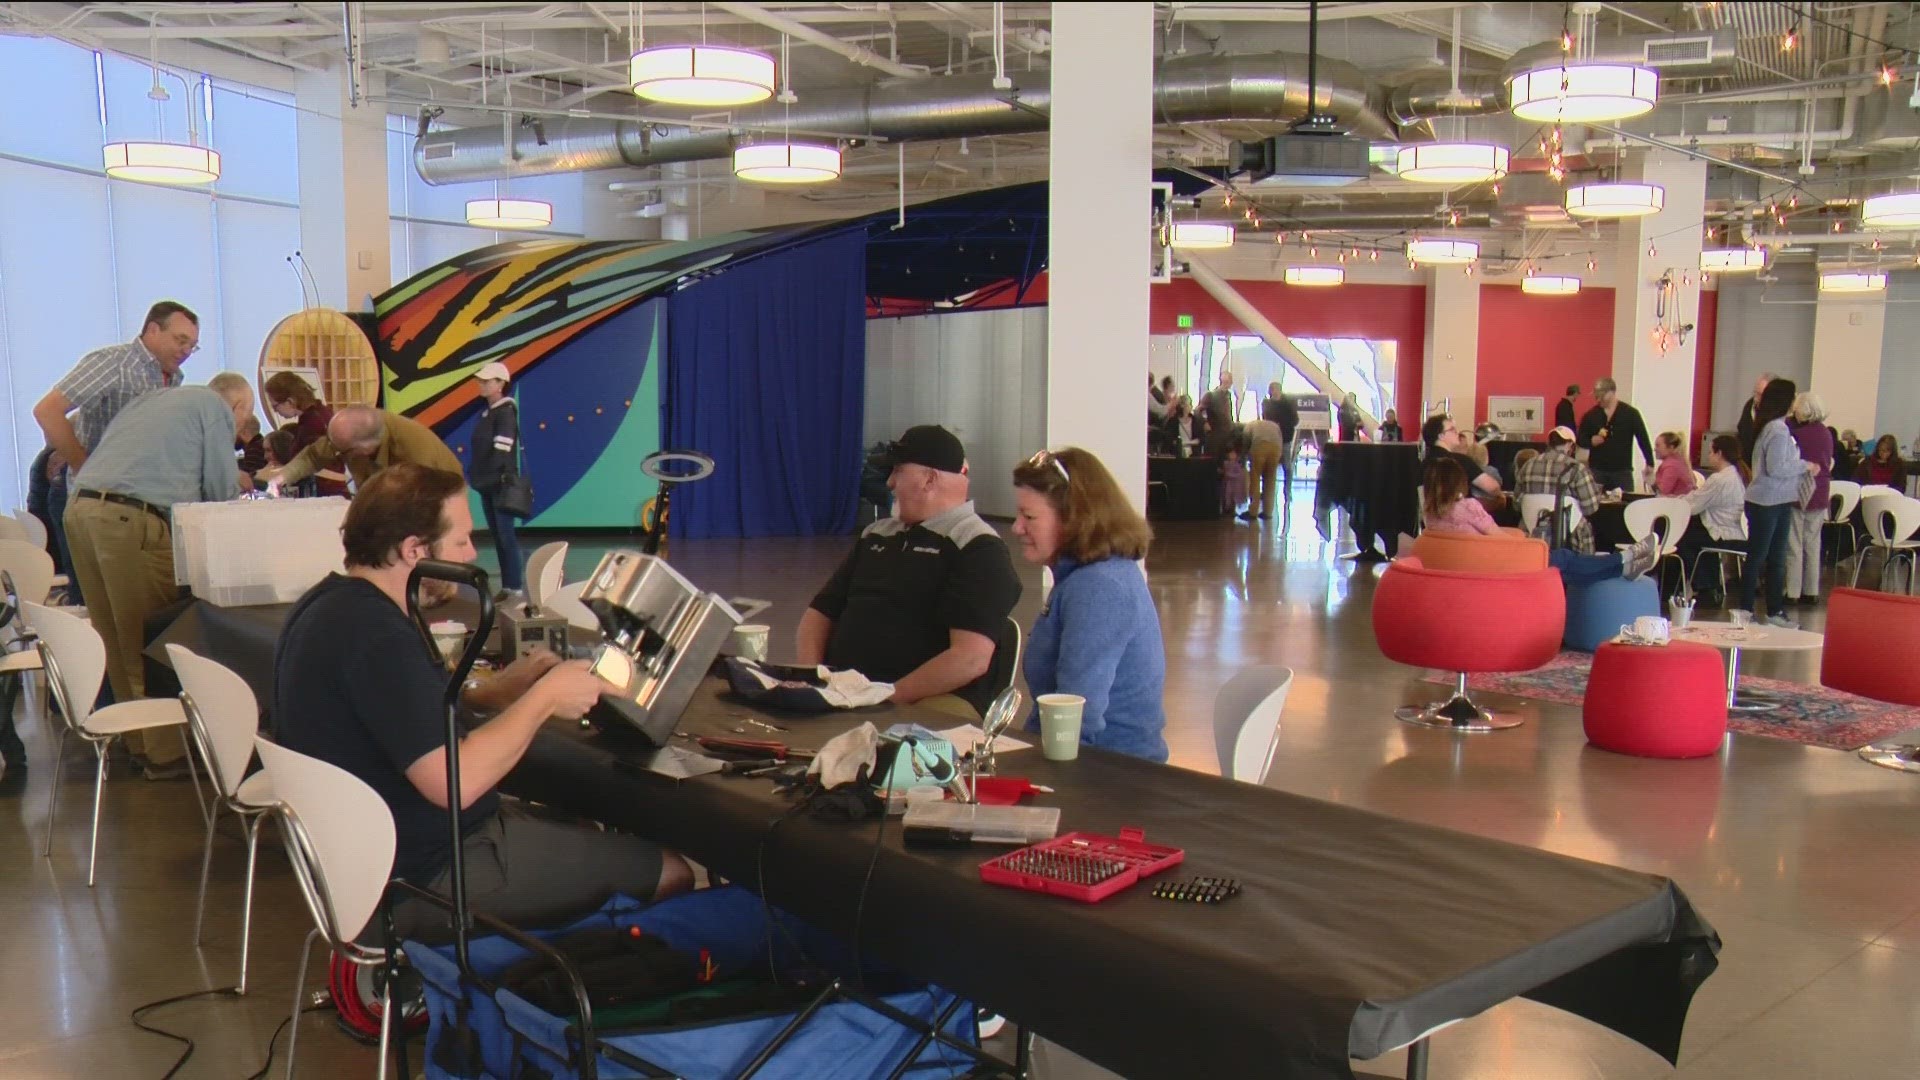 "Repair Cafe" is an international movement where community members help each other fix things. KTVB Photojournalist John Mark Krum dropped by for third annual event.